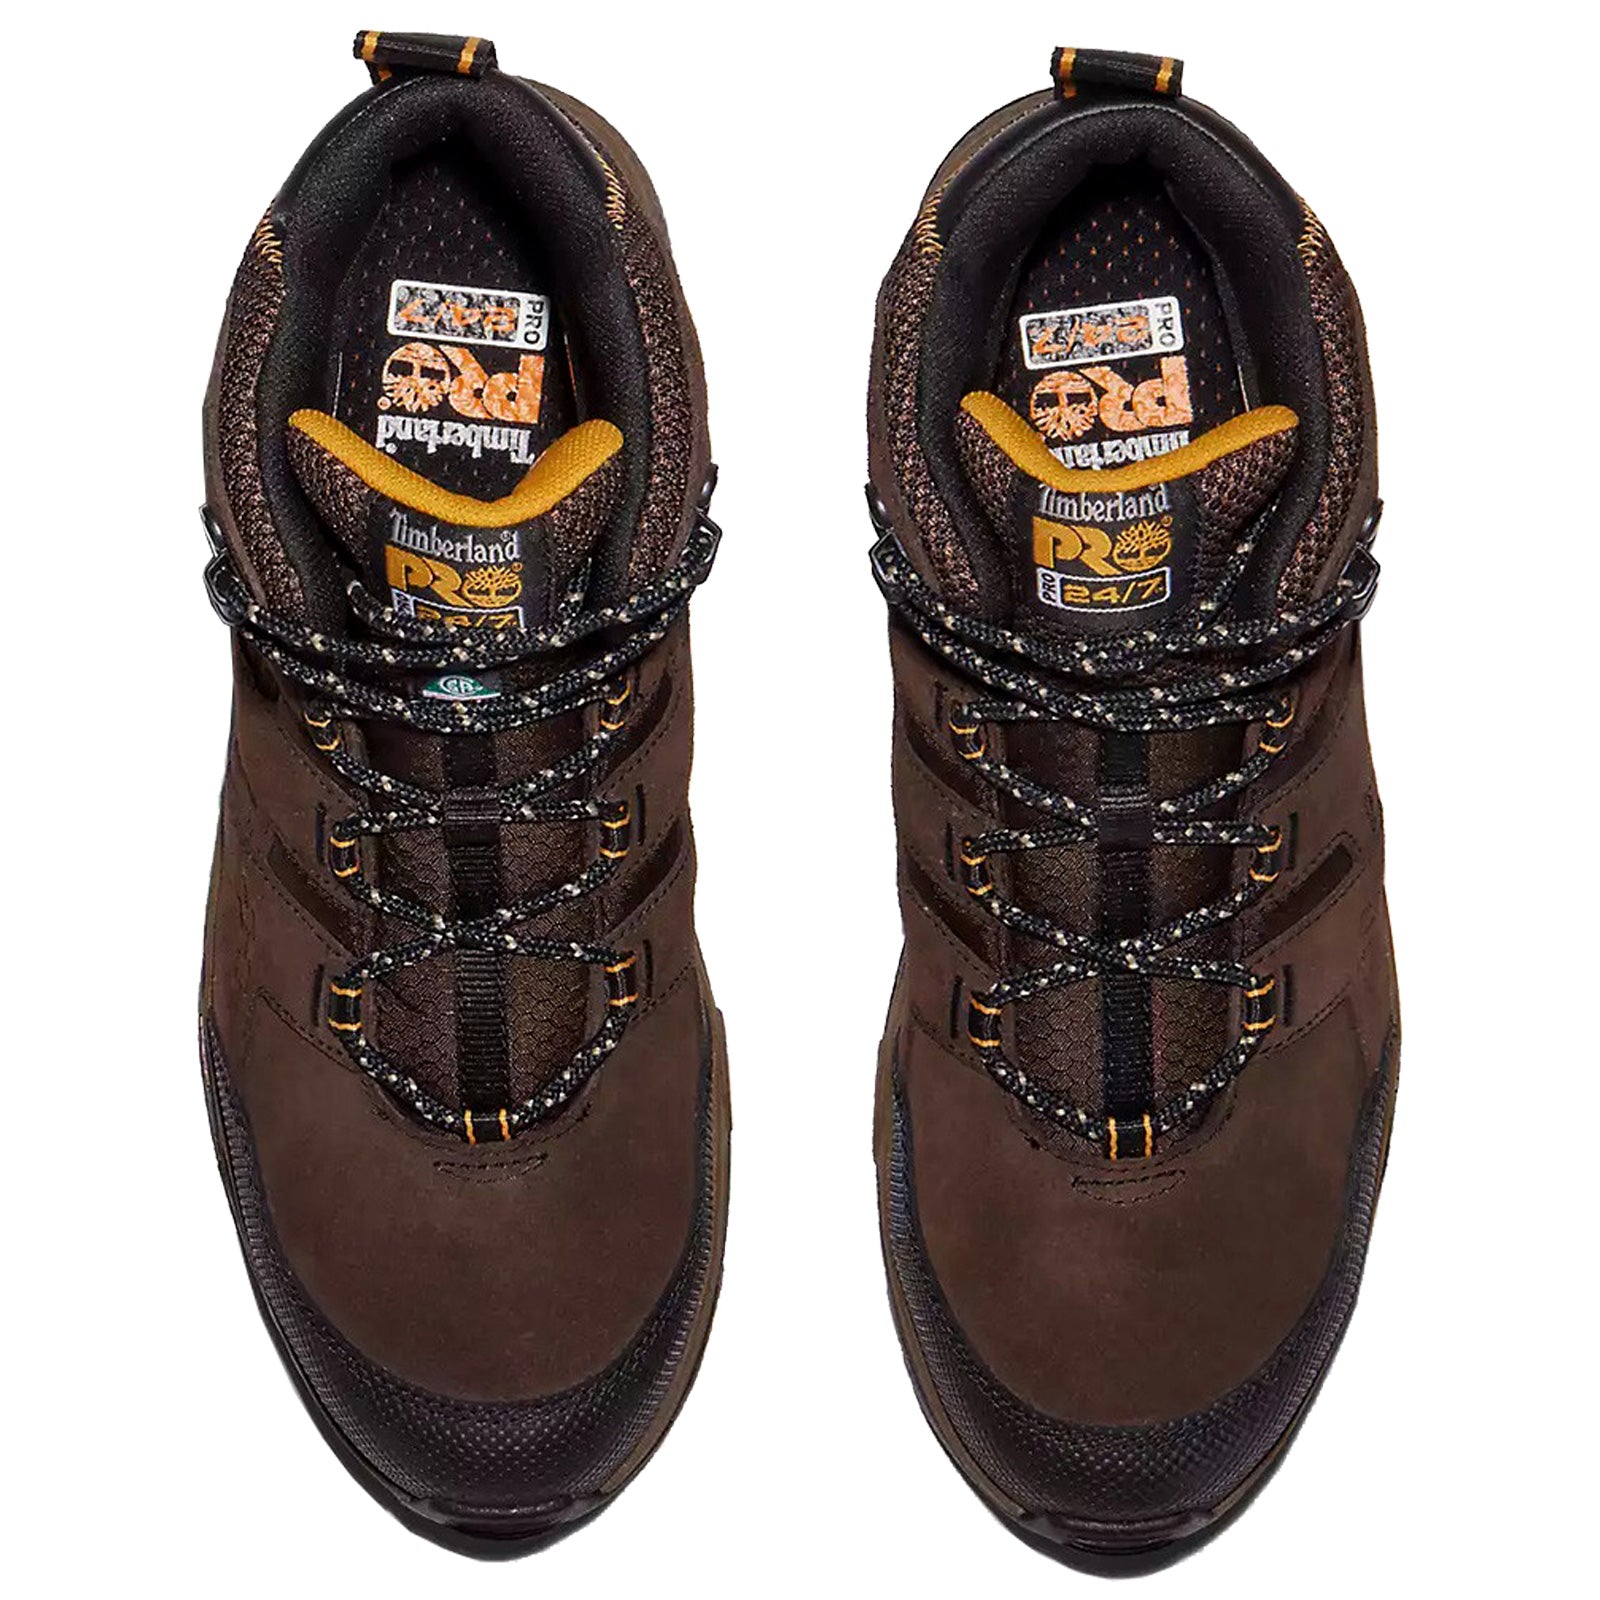 Timberland Pro Mens Switchback LT Safety Boots